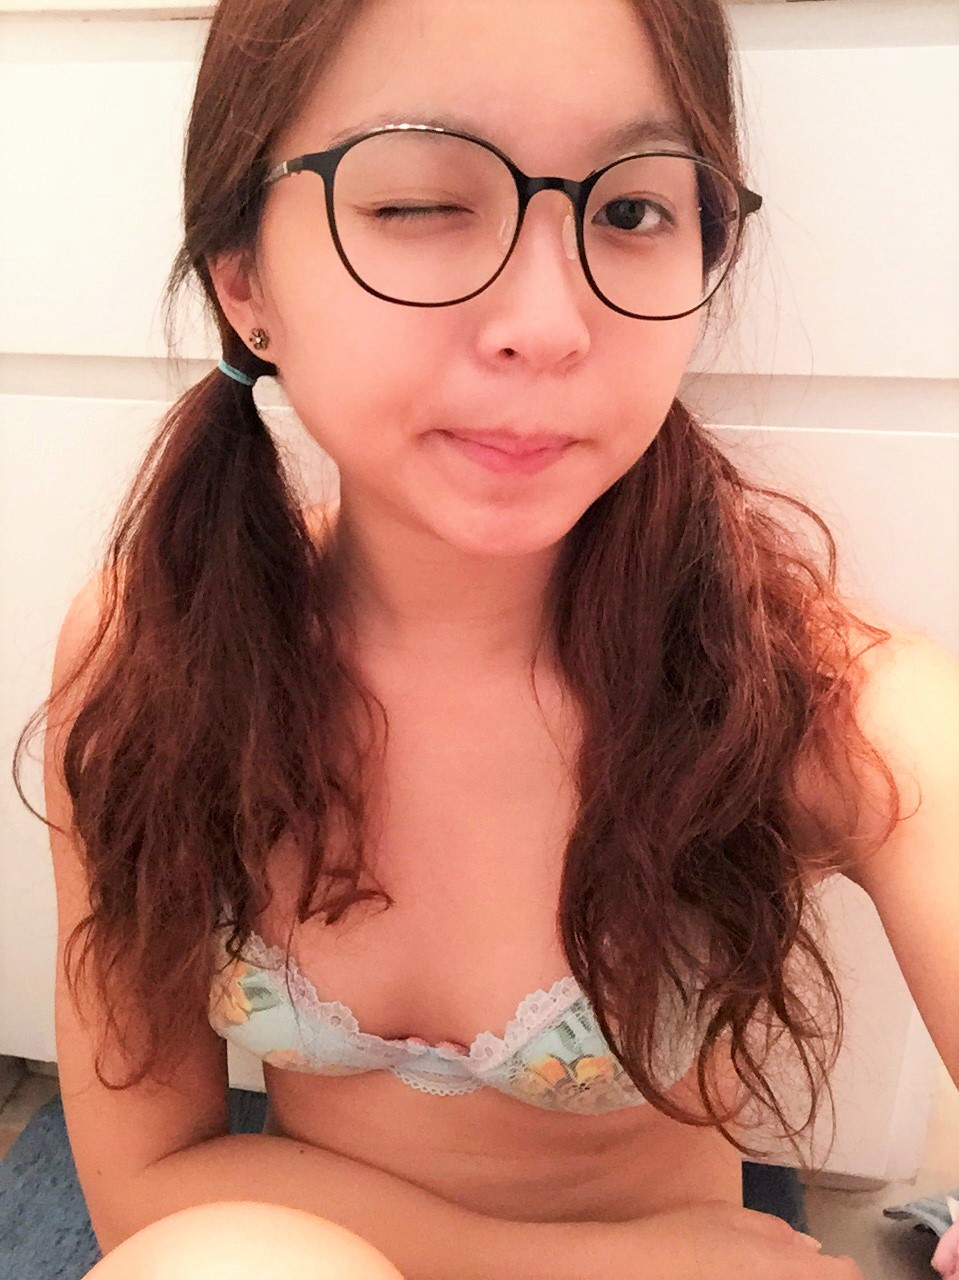 Petite Asian Teen Takes Nude Selfies - HT4jtBT Porn picture